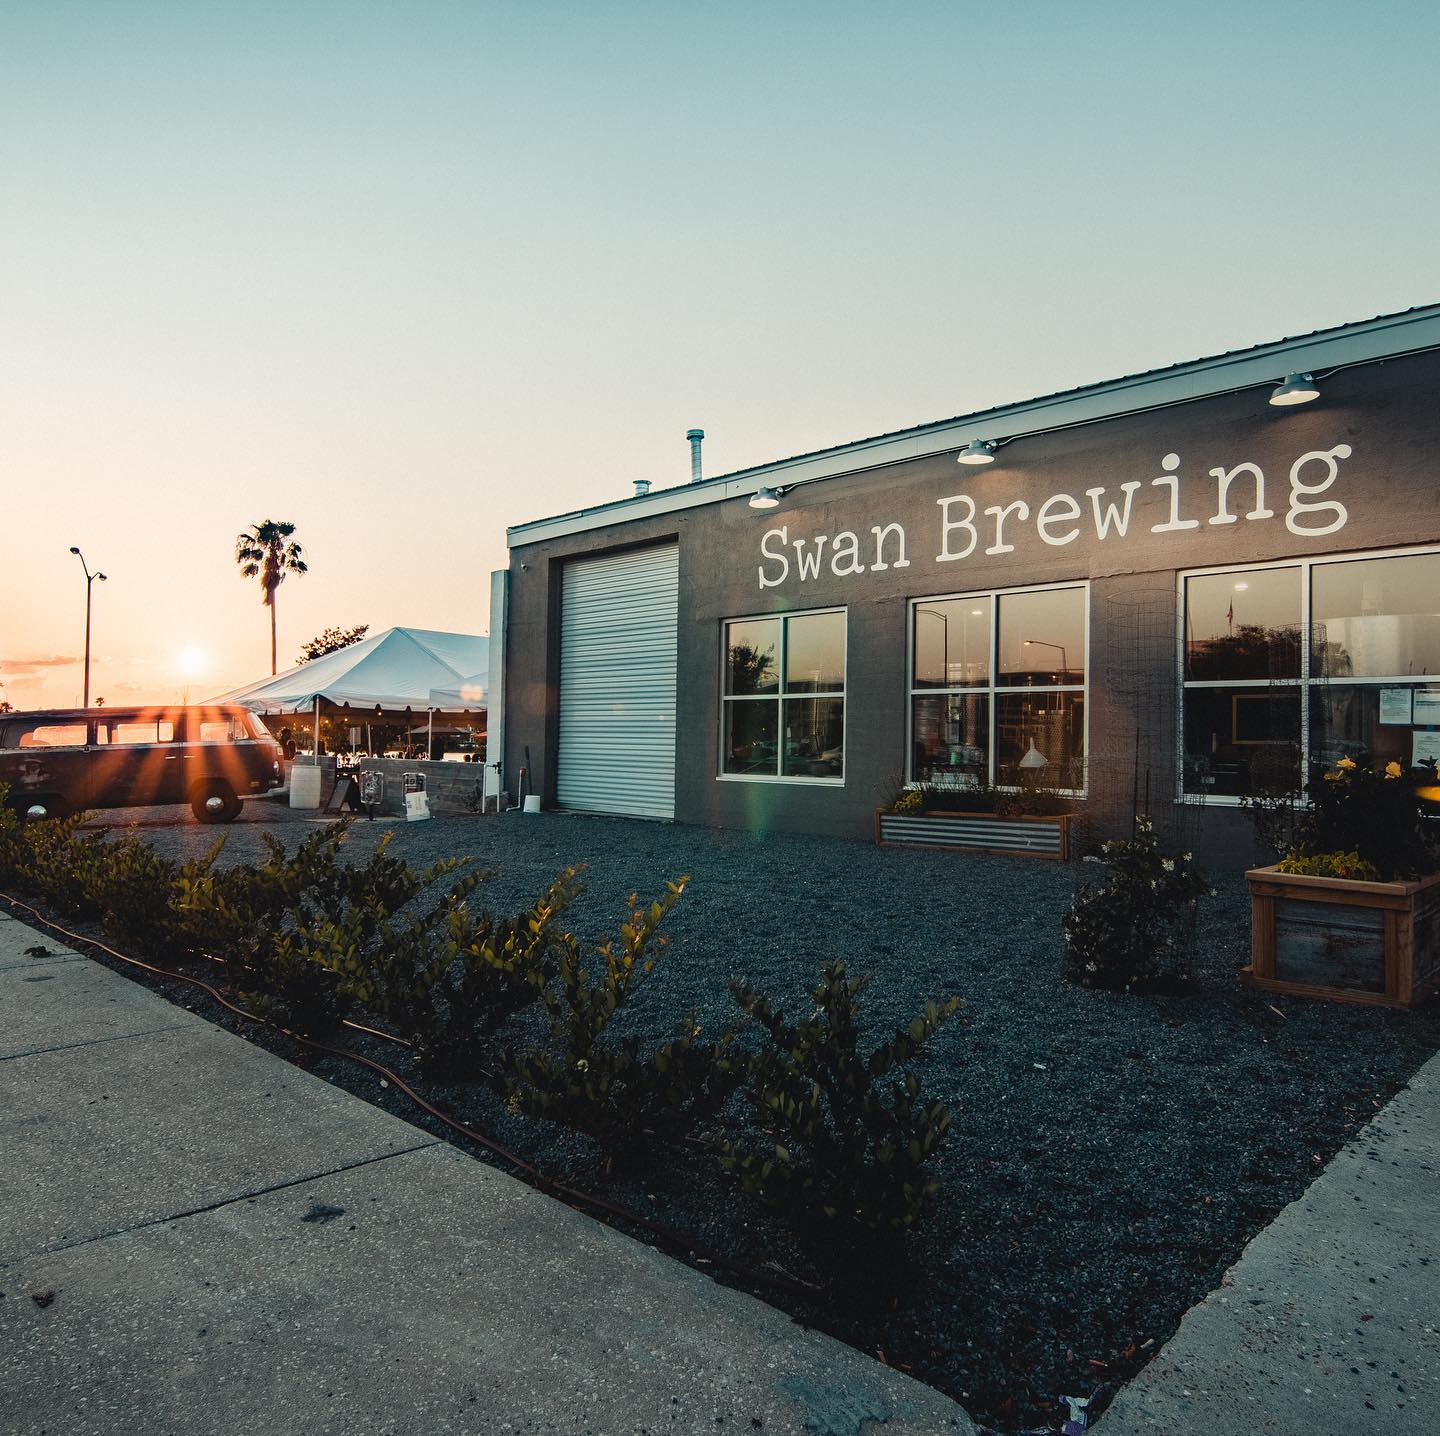 outside sunset at swan brewing in lakeland, fl